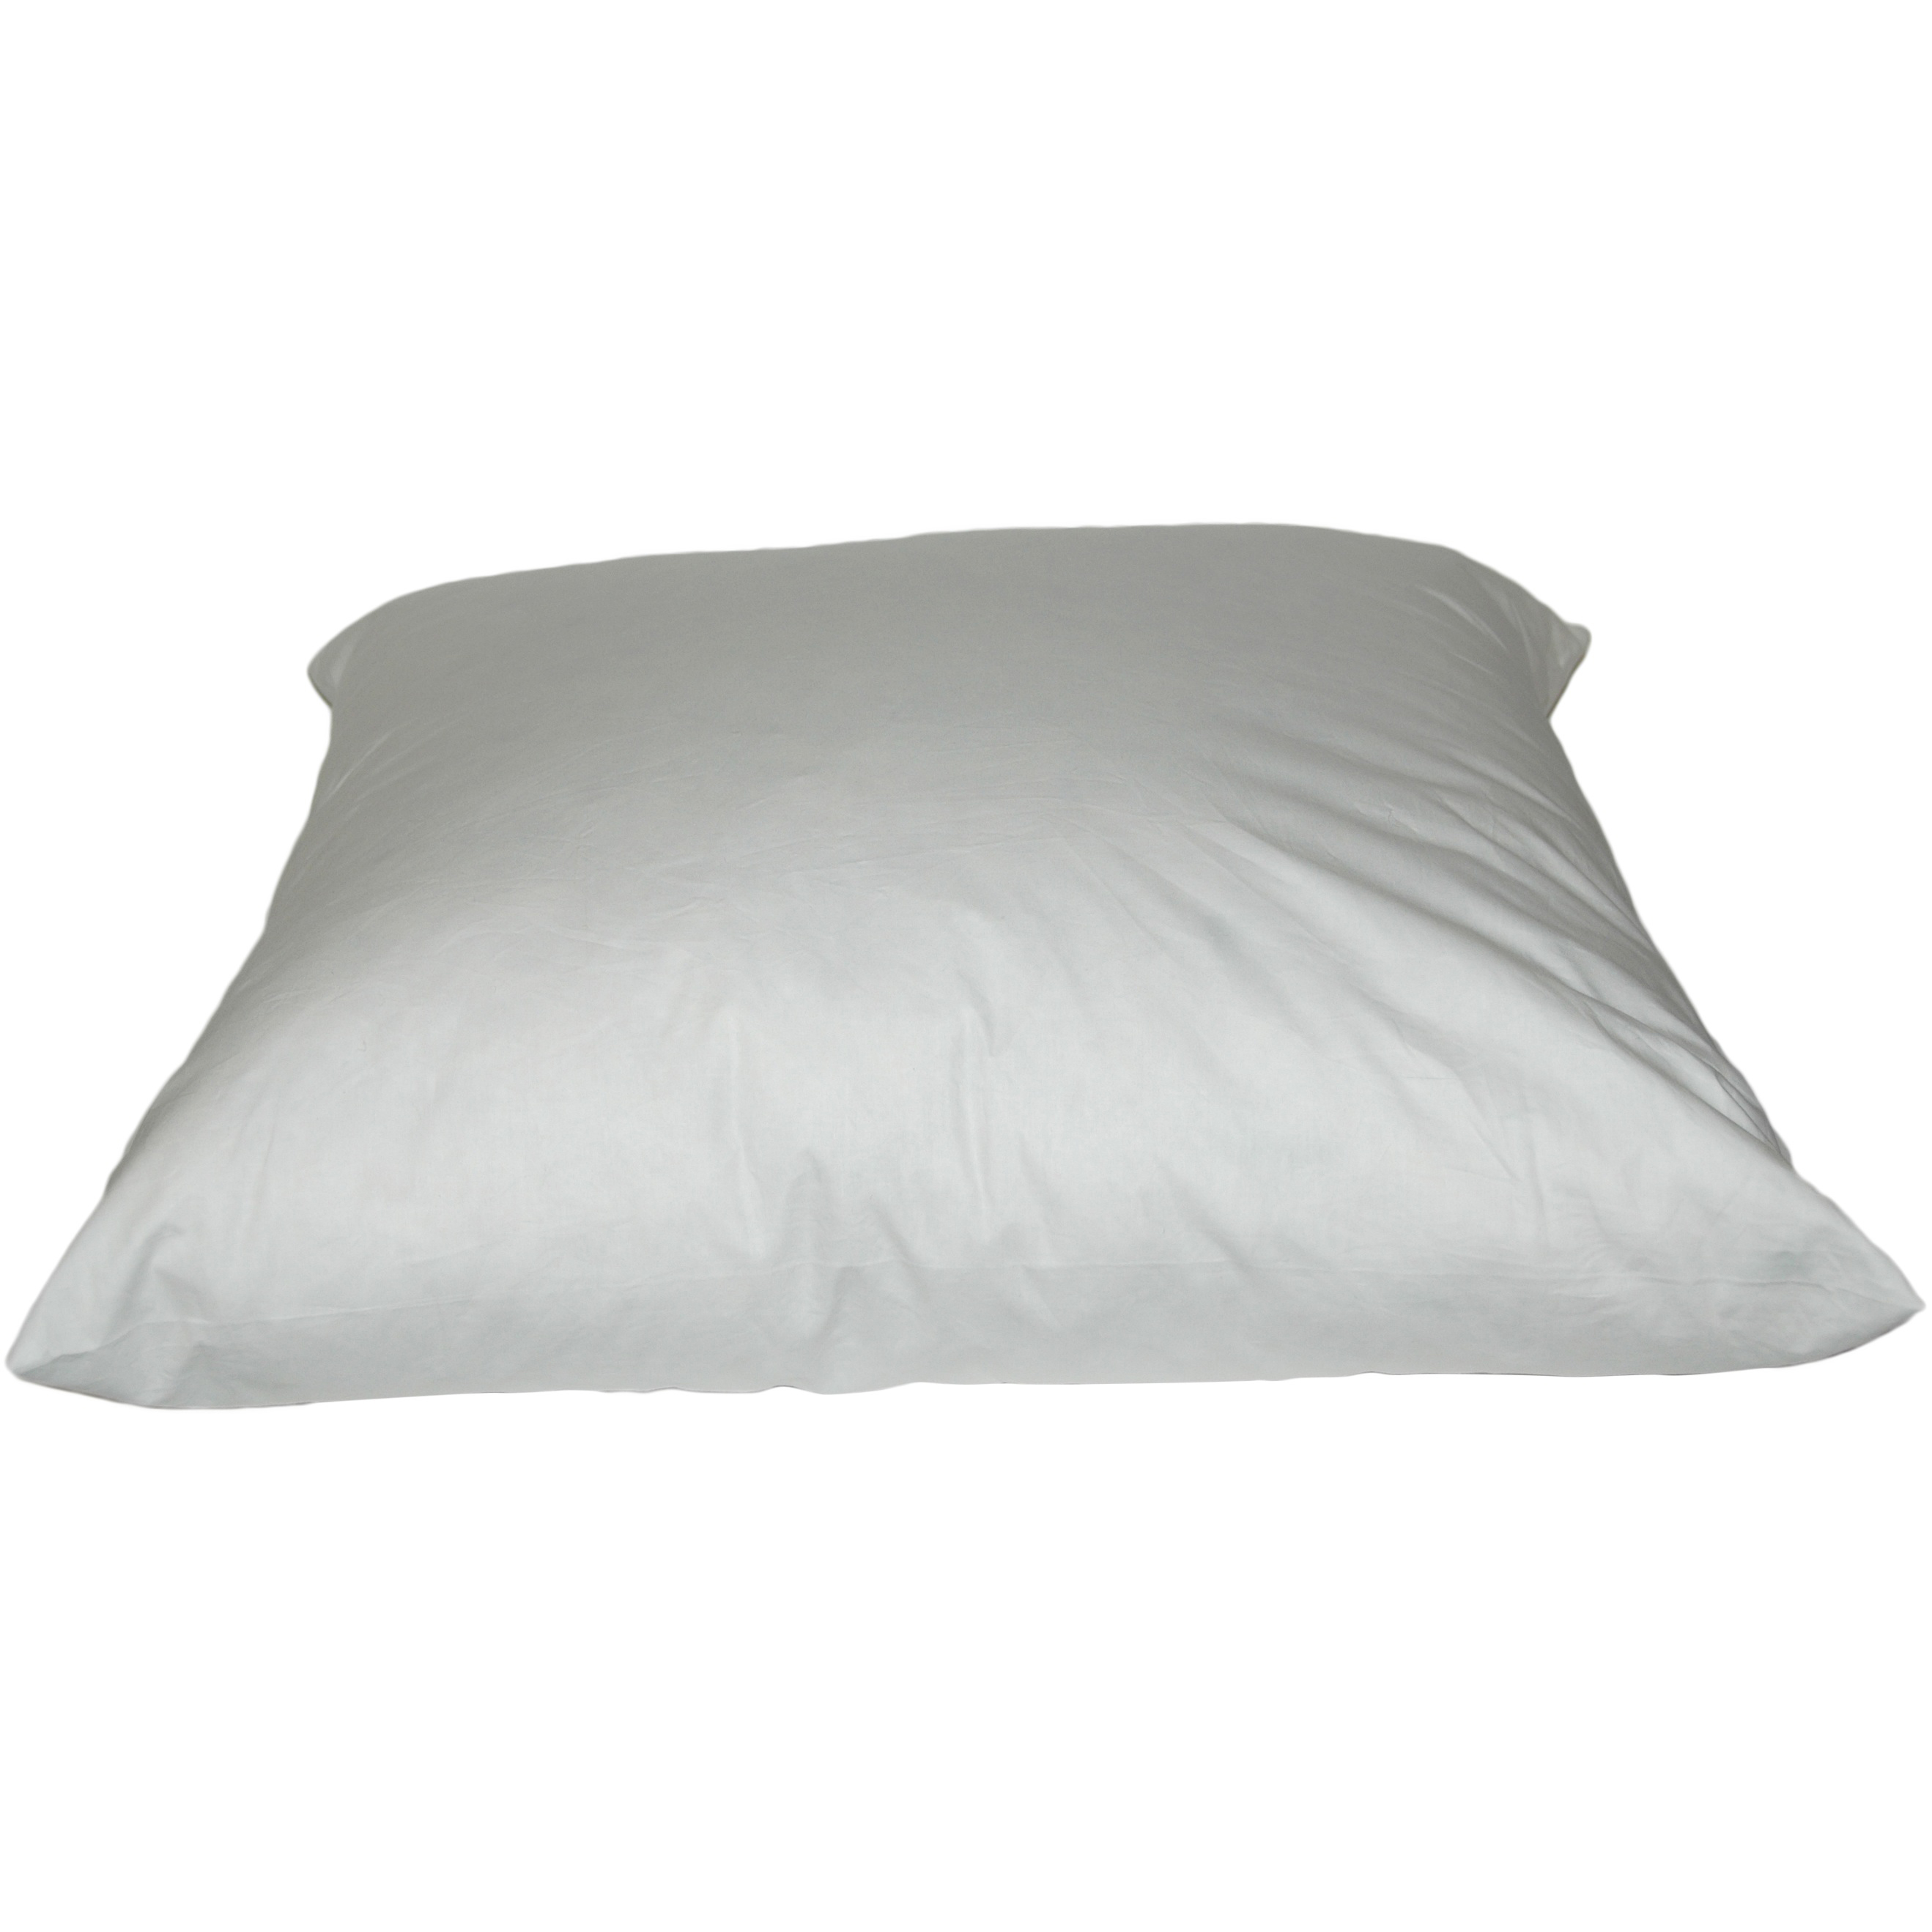 Down & Feather Pillows 50/50 Blend 18 inch